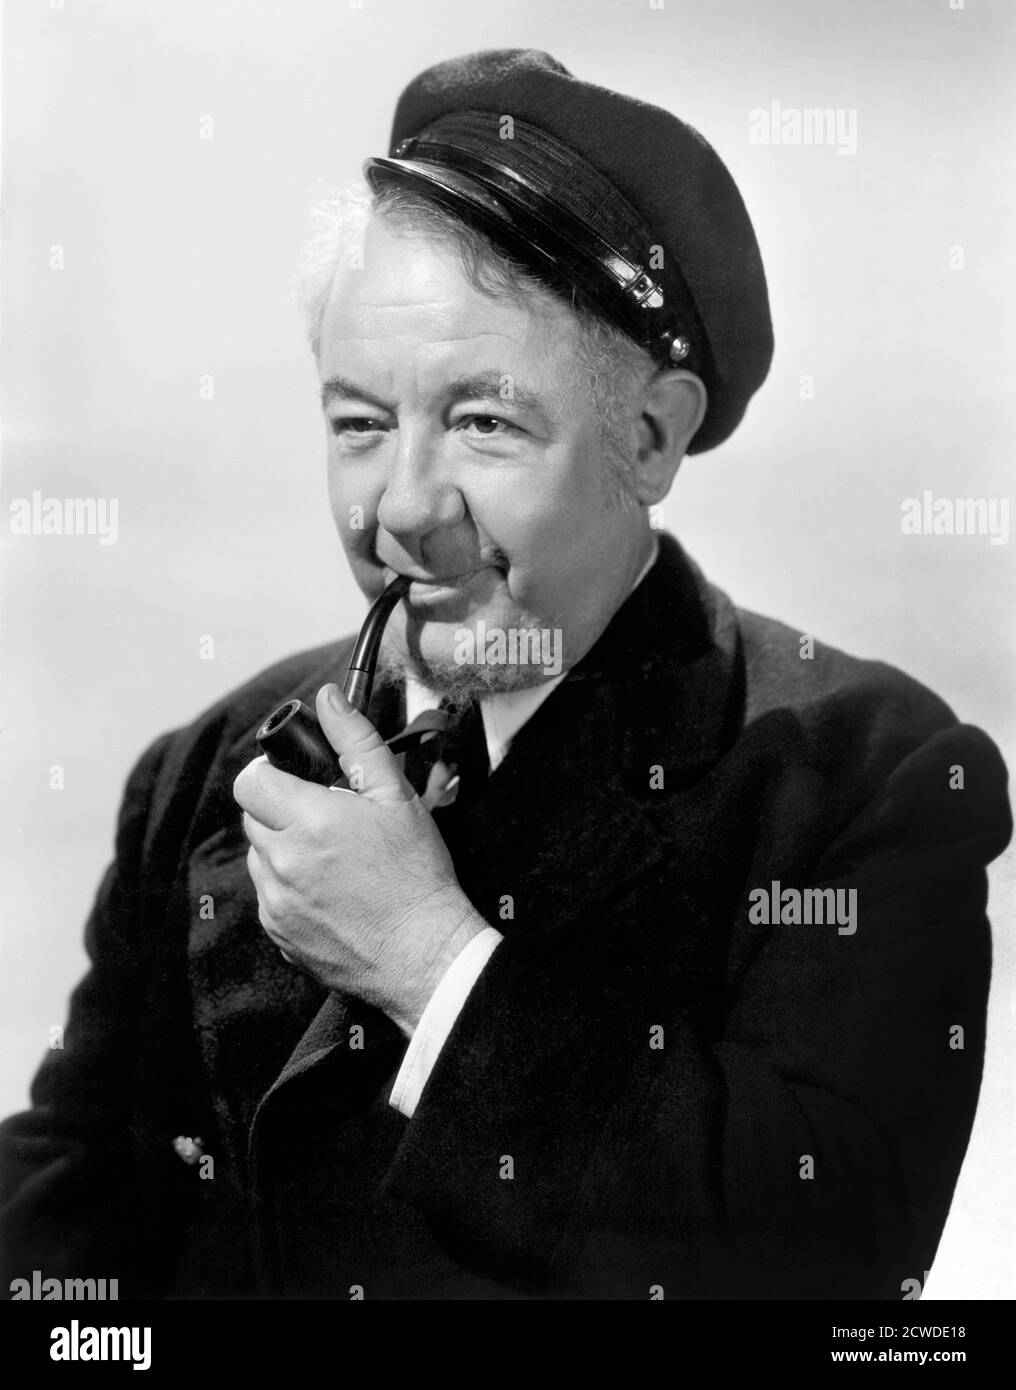 Cecil Kellaway, Publicity Portrait for the Film, 'The Cockeyed Miracle', MGM, 1946 Stock Photo